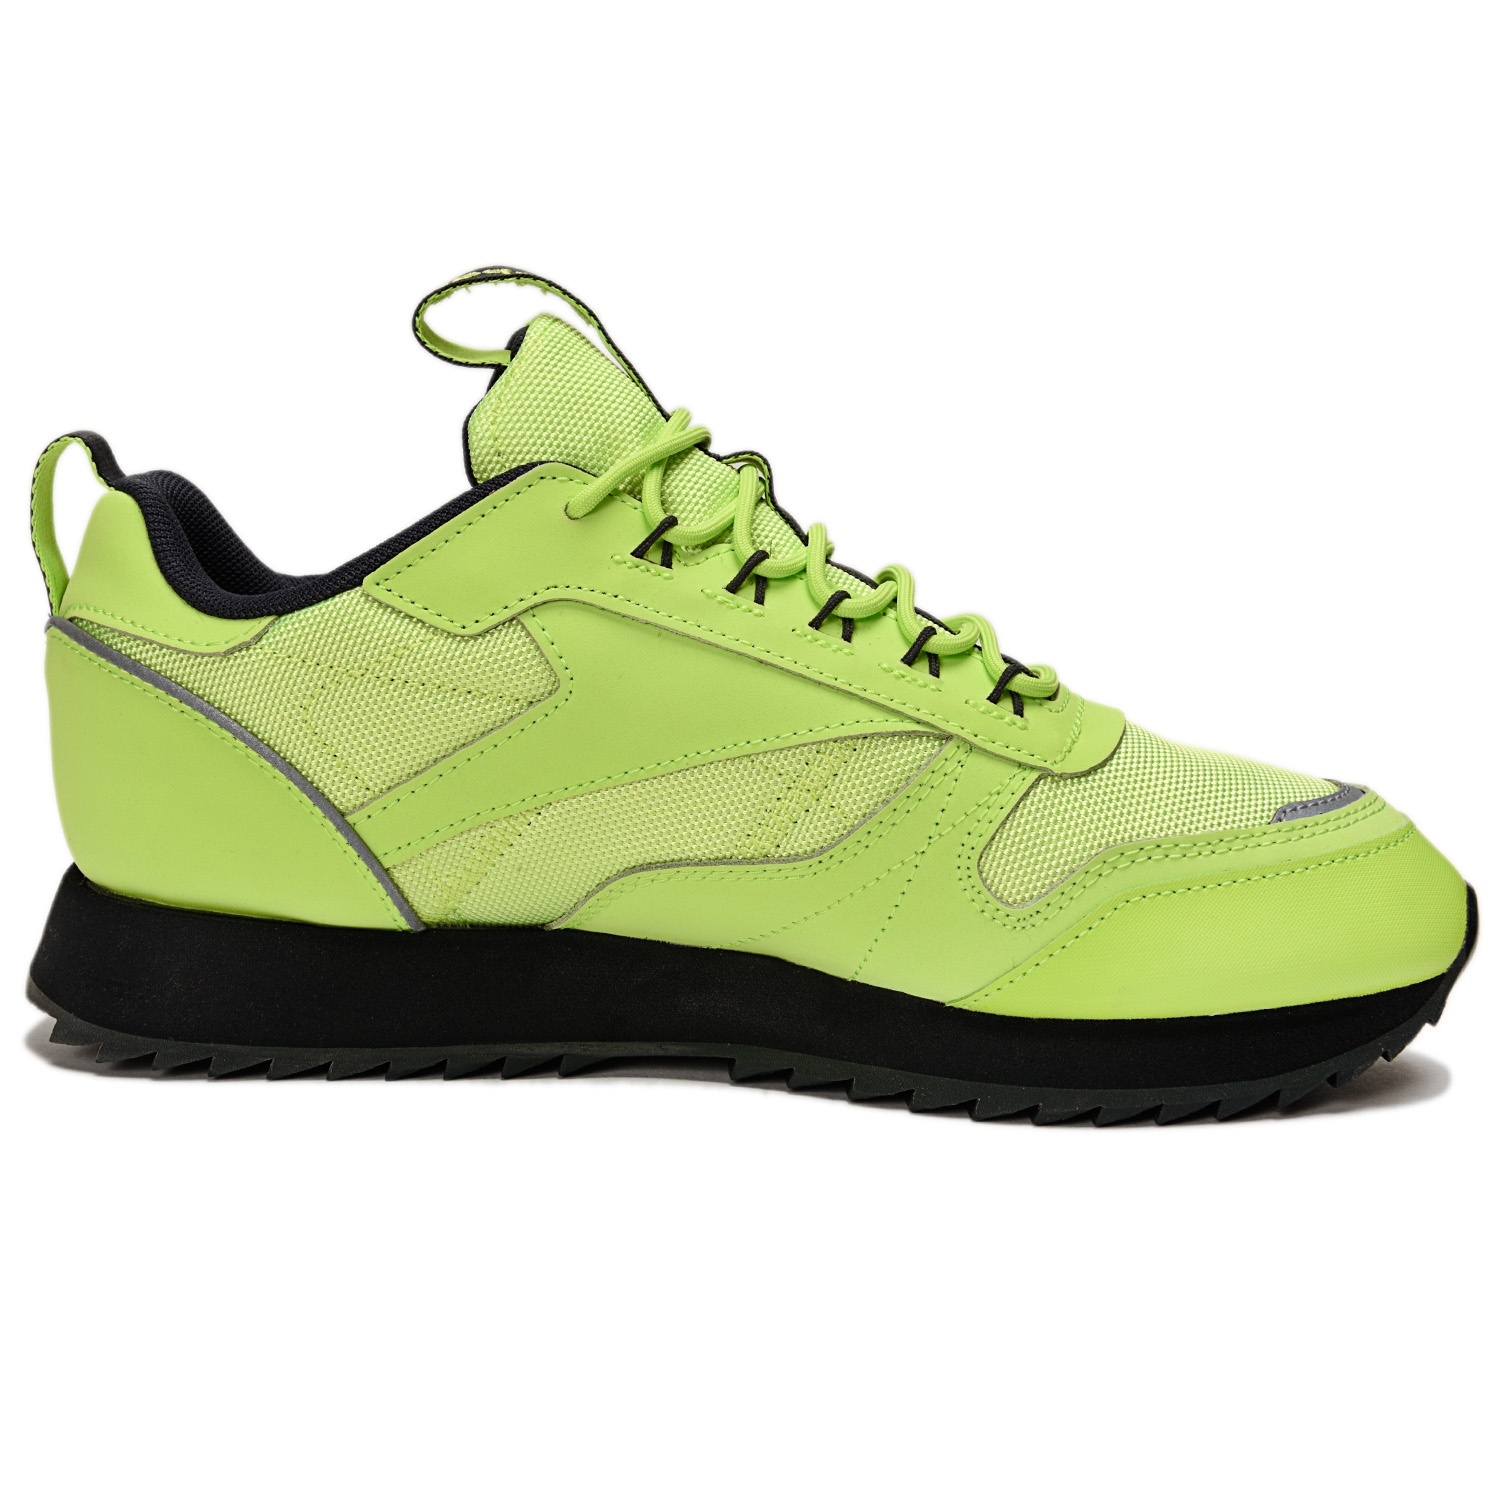 REEBOK CLASSIC LEATHER RIPPLE TRAIL NEON LIME/NEON LIME/TRUE GREY 8